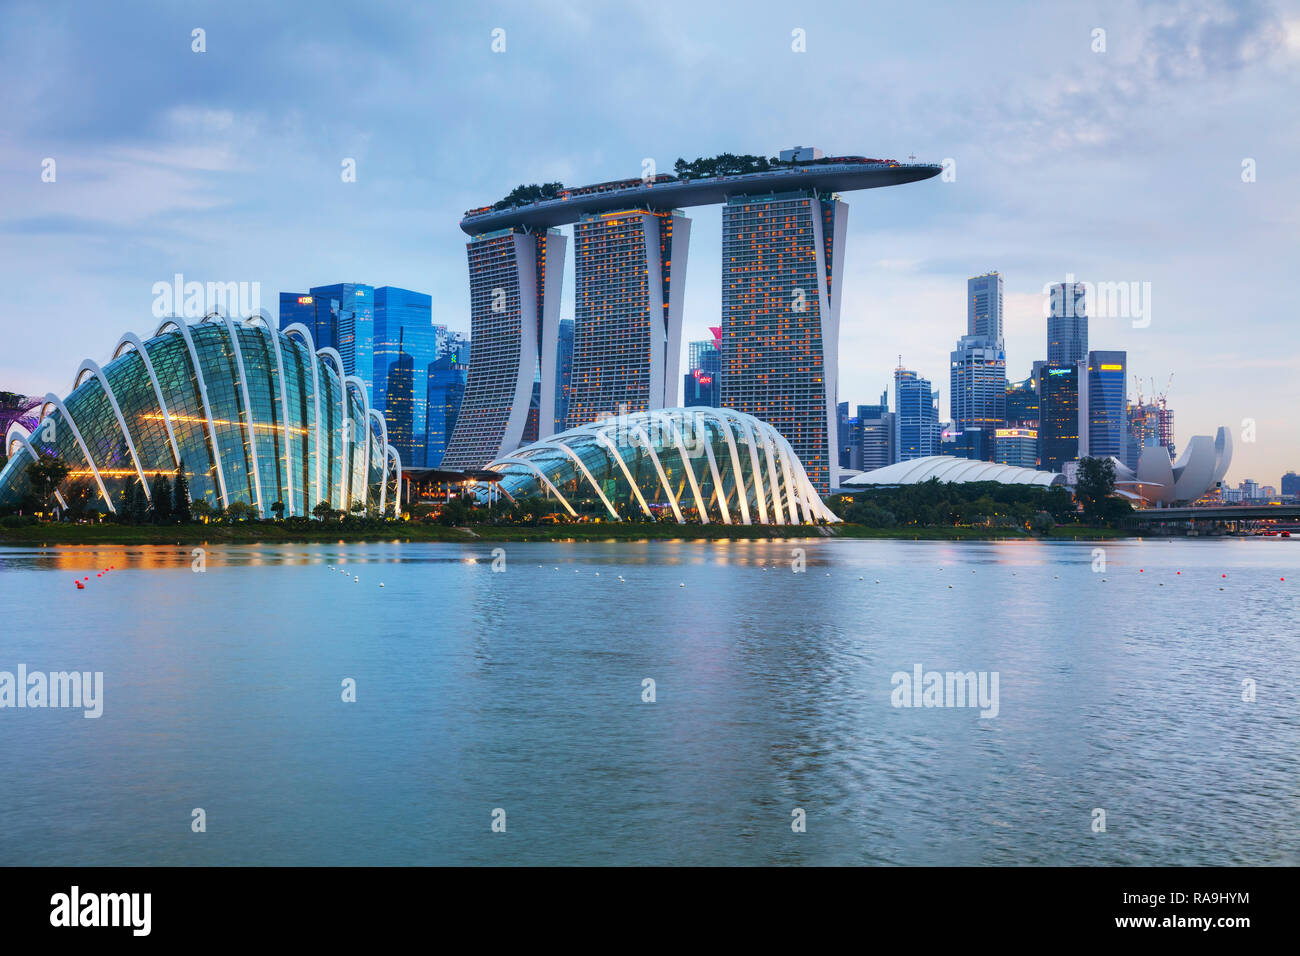 SINGAPORE - OCTOBER 27: Overview of the marina bay with Marina Bay Sands on October 27, 2018 in Singapore. Stock Photo